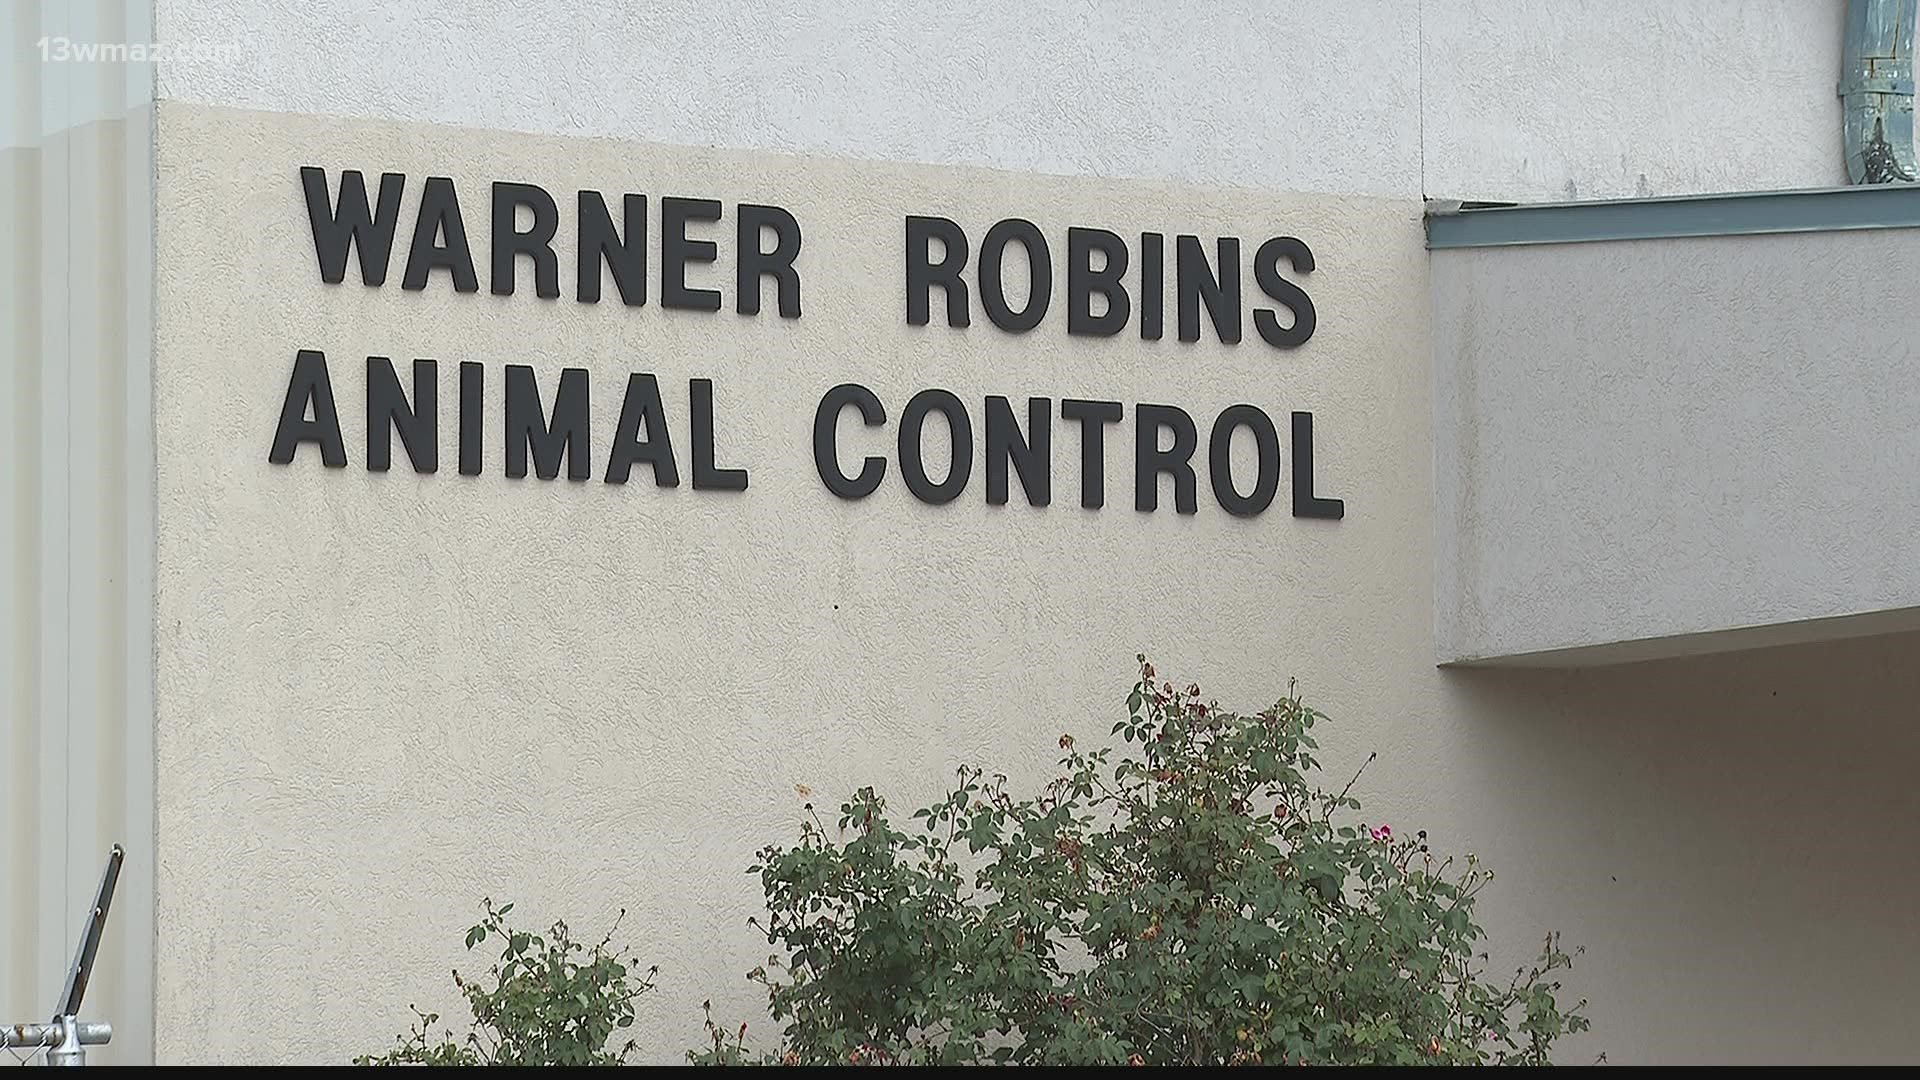 If Warner Robins Animal Control picks up your stray dog or cat, you're going to pay a lot more to get your pet back.